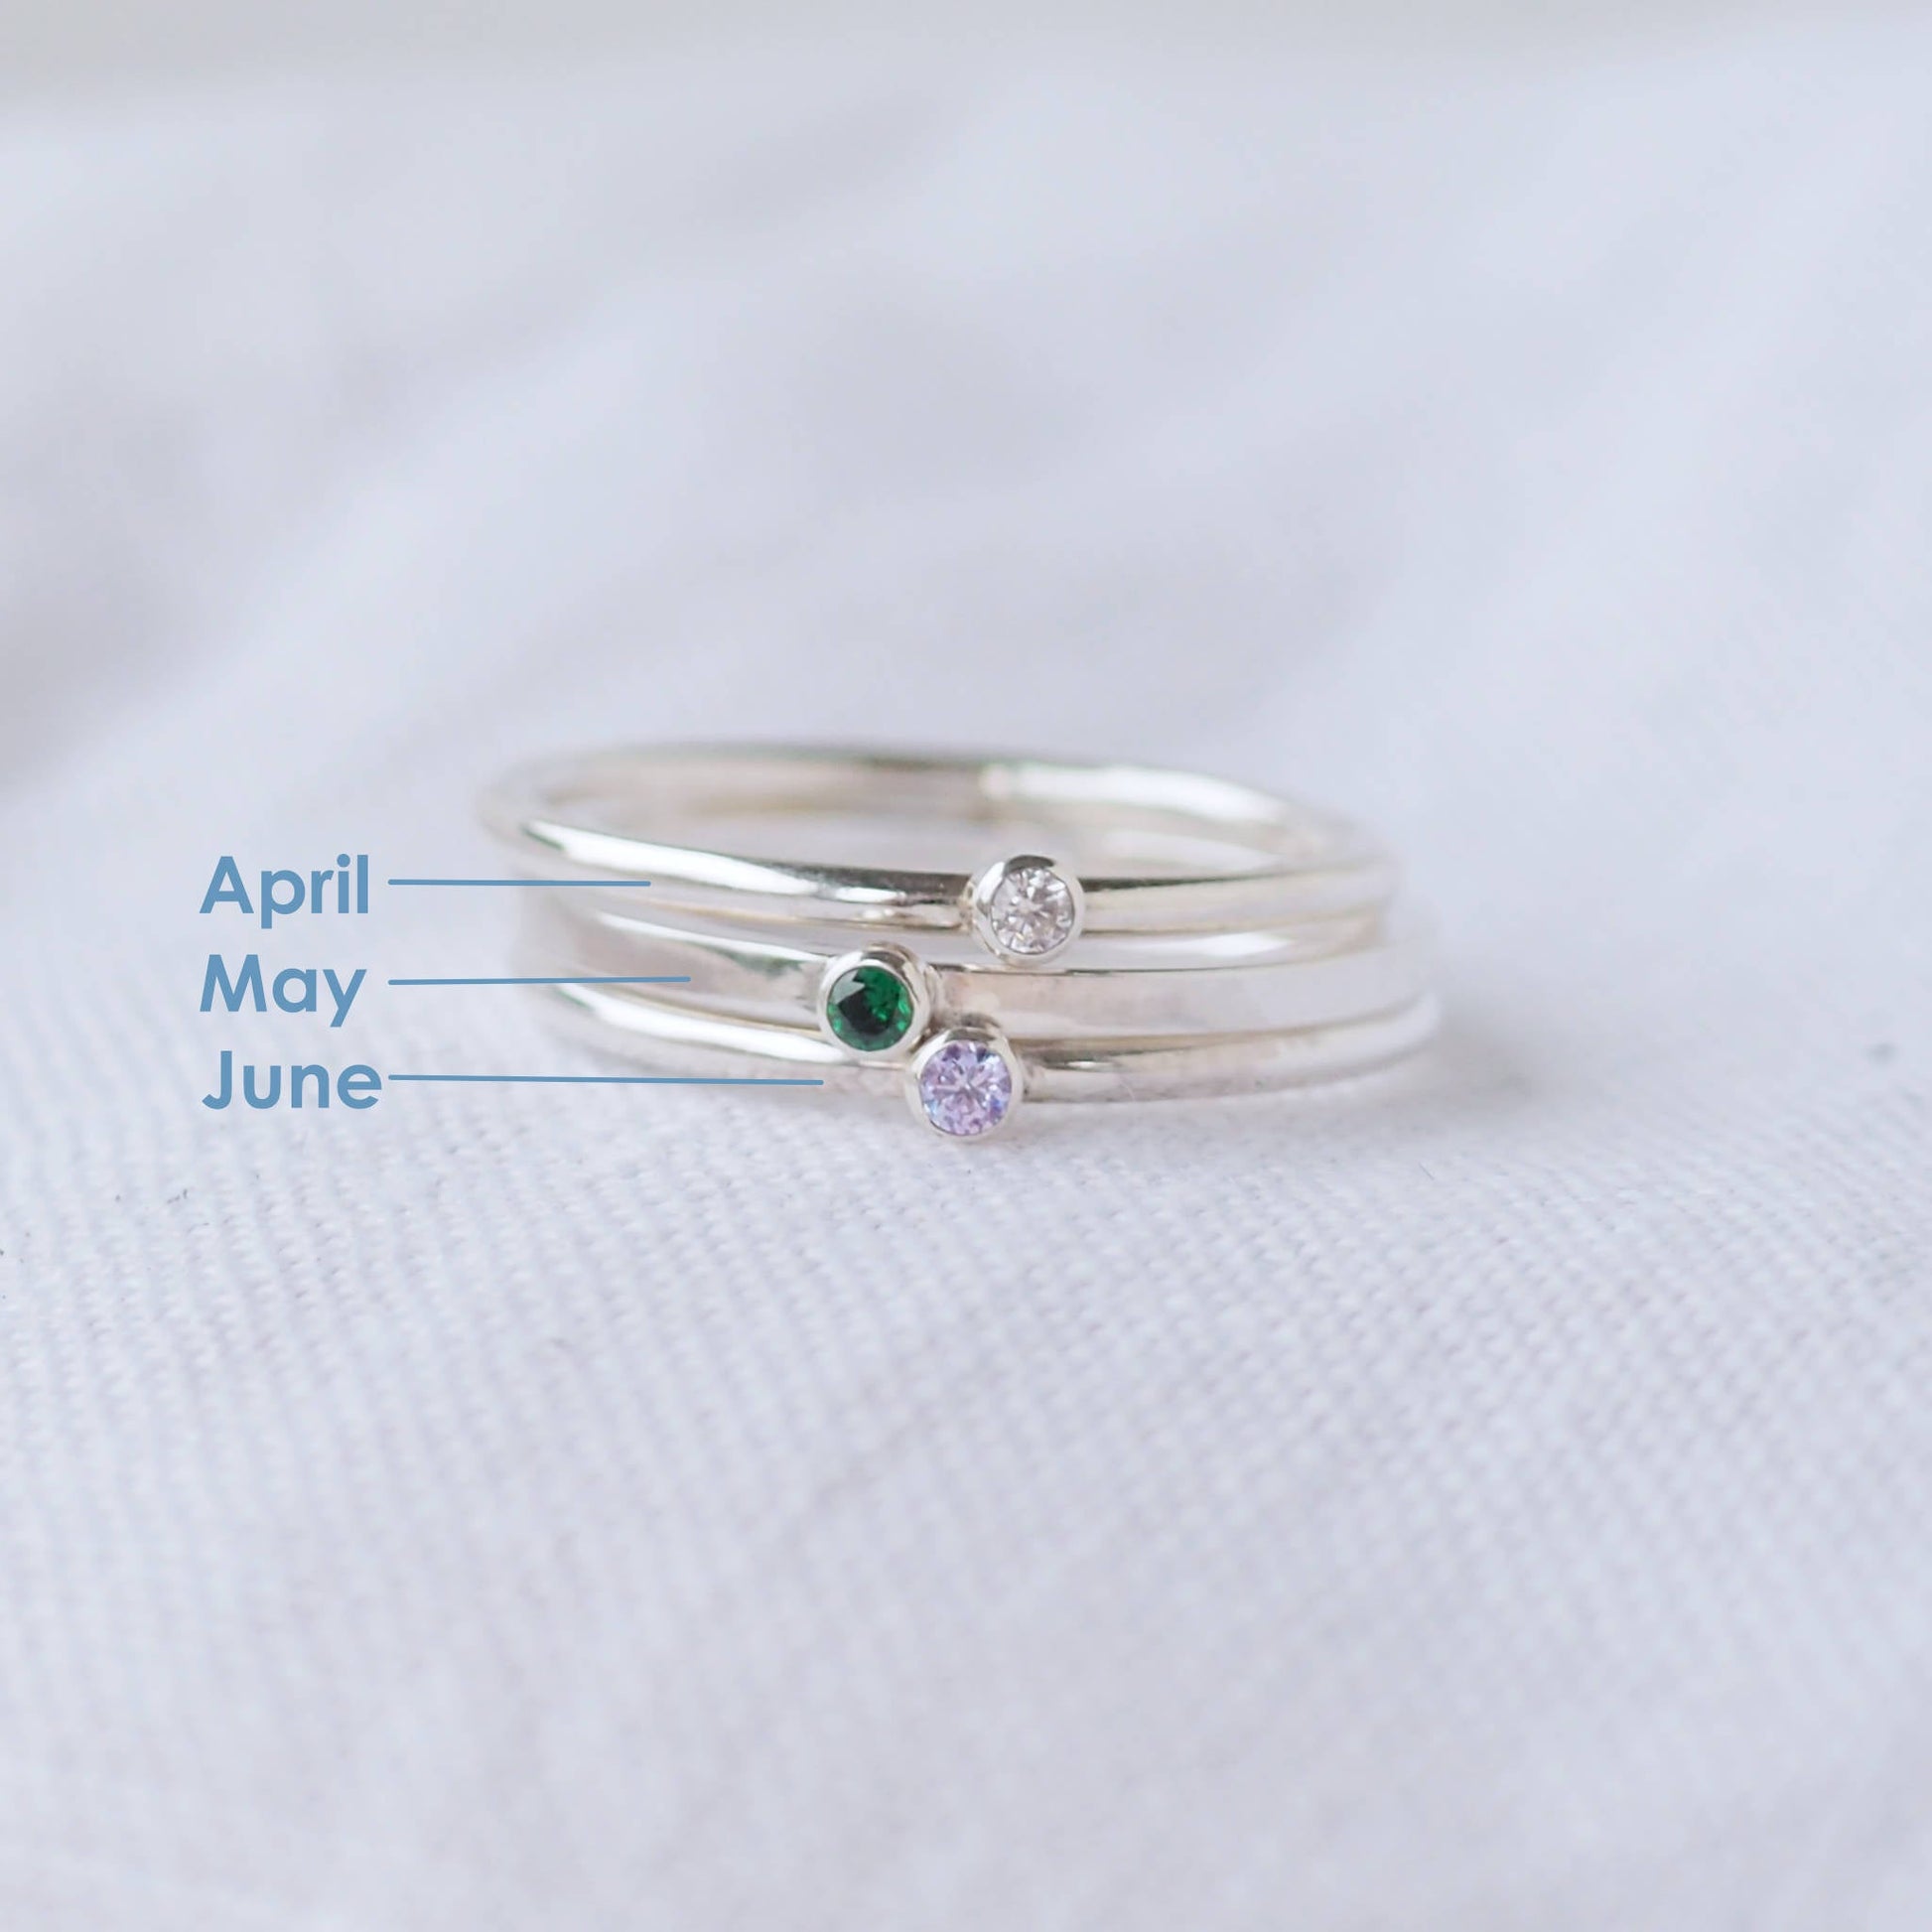 Three silver rings showing April, May and June Birthstones. The rings are simple silver bands with a miniature birthstone on the band in clear, green and pink cubic zirconia. Handmade in Edinburgh by maram jewellery